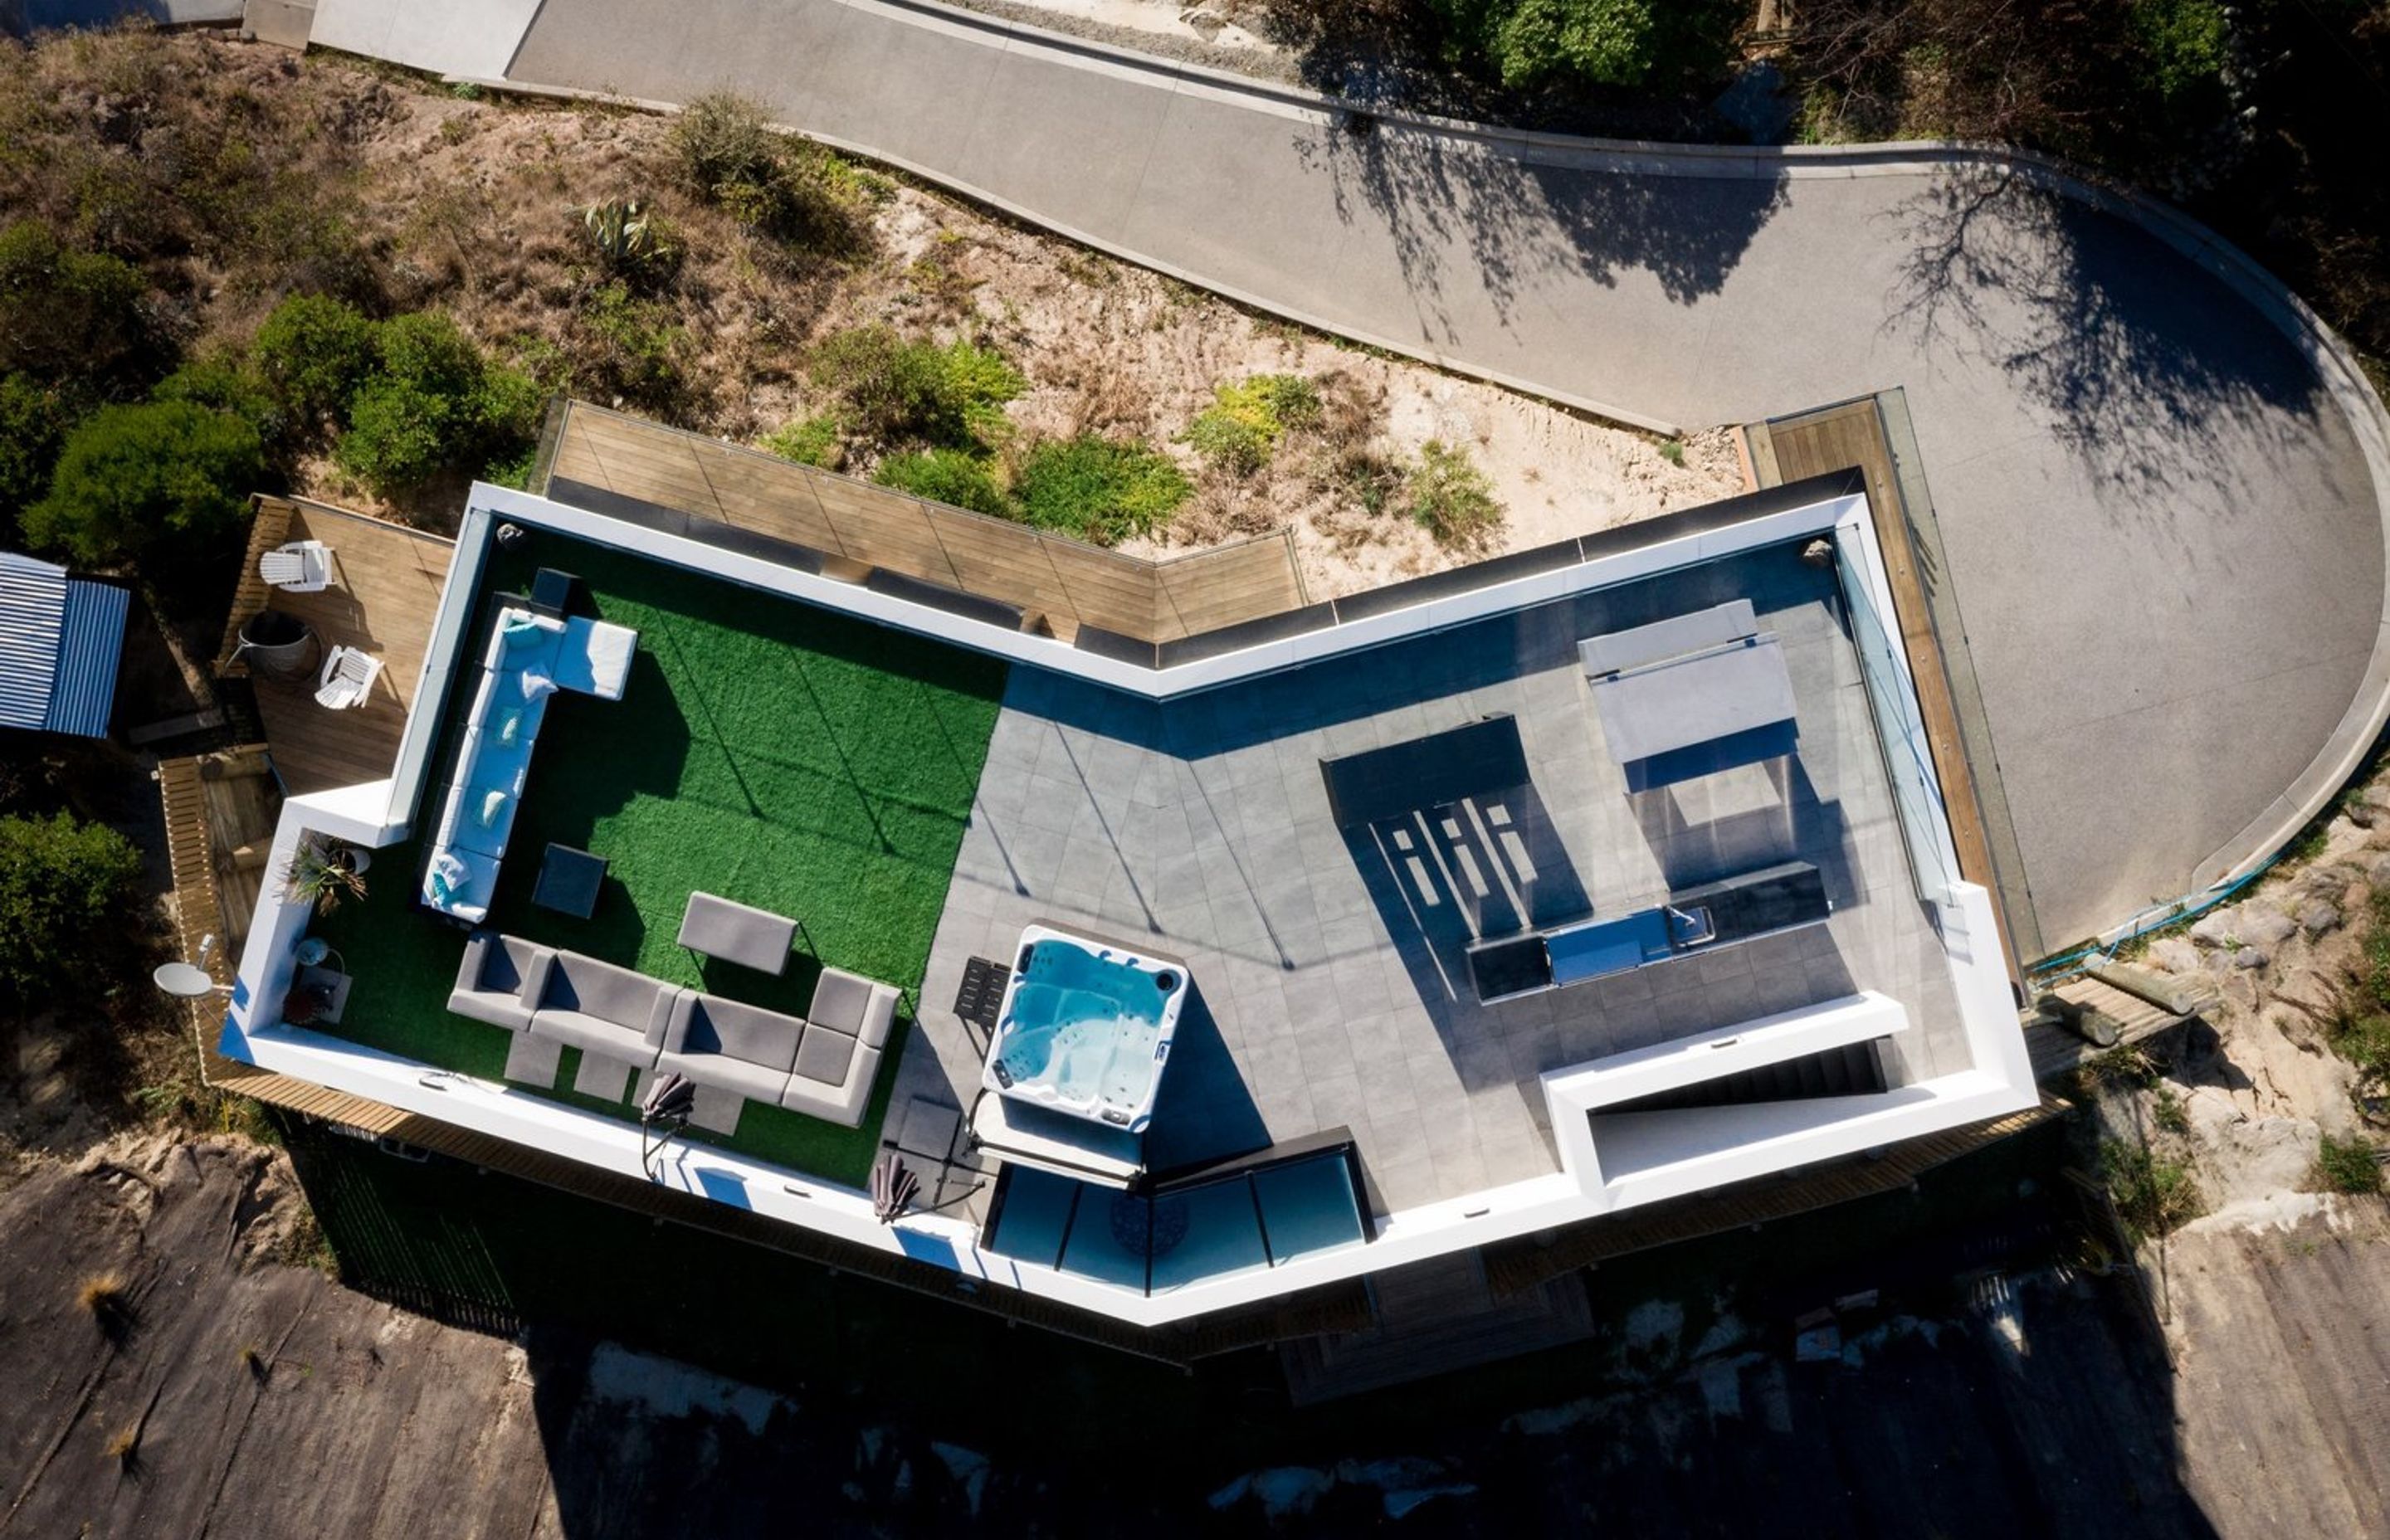 A bird's eye view of the site plan shows the outdoor lounge area on astroturf. the spa pool and an outdoor kitchen and dining area leading to the staircase.